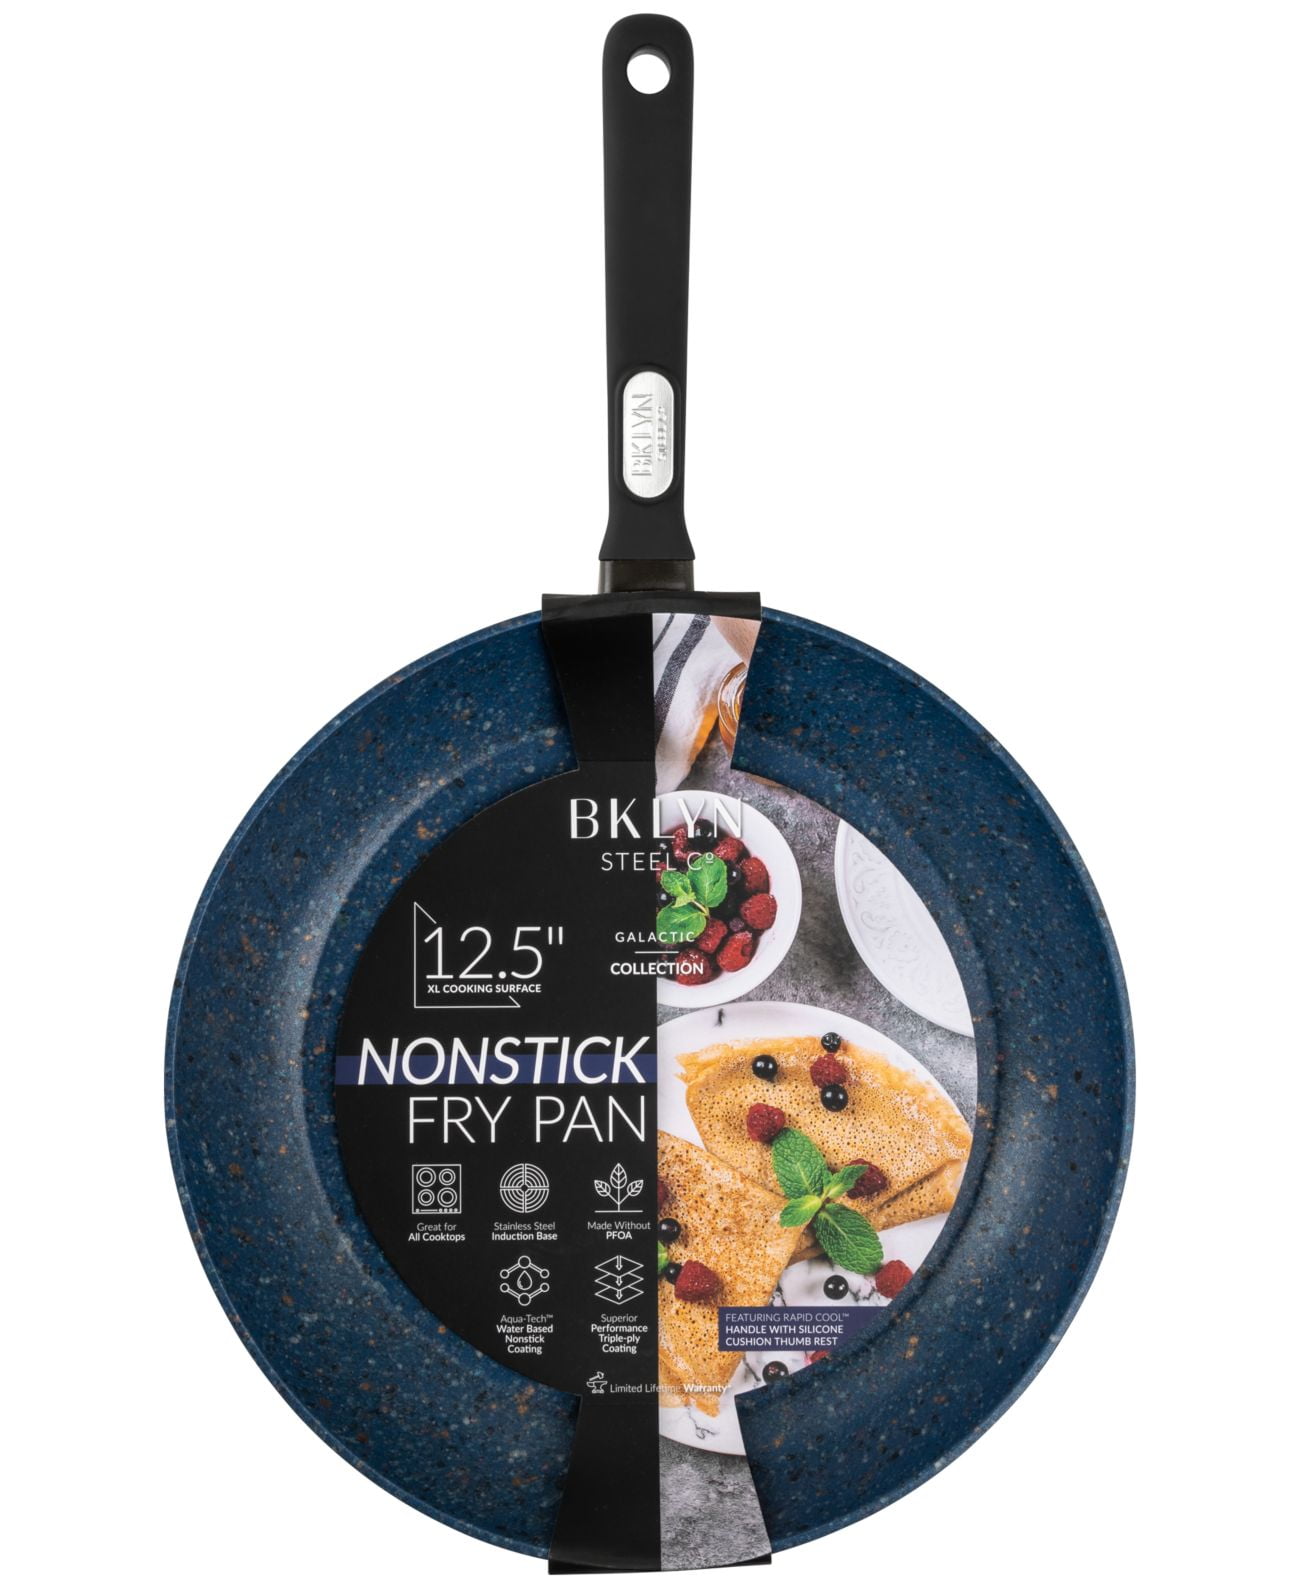 Brooklyn Steel Co. Nebula Collection Ceramic Nonstick Fry Pan